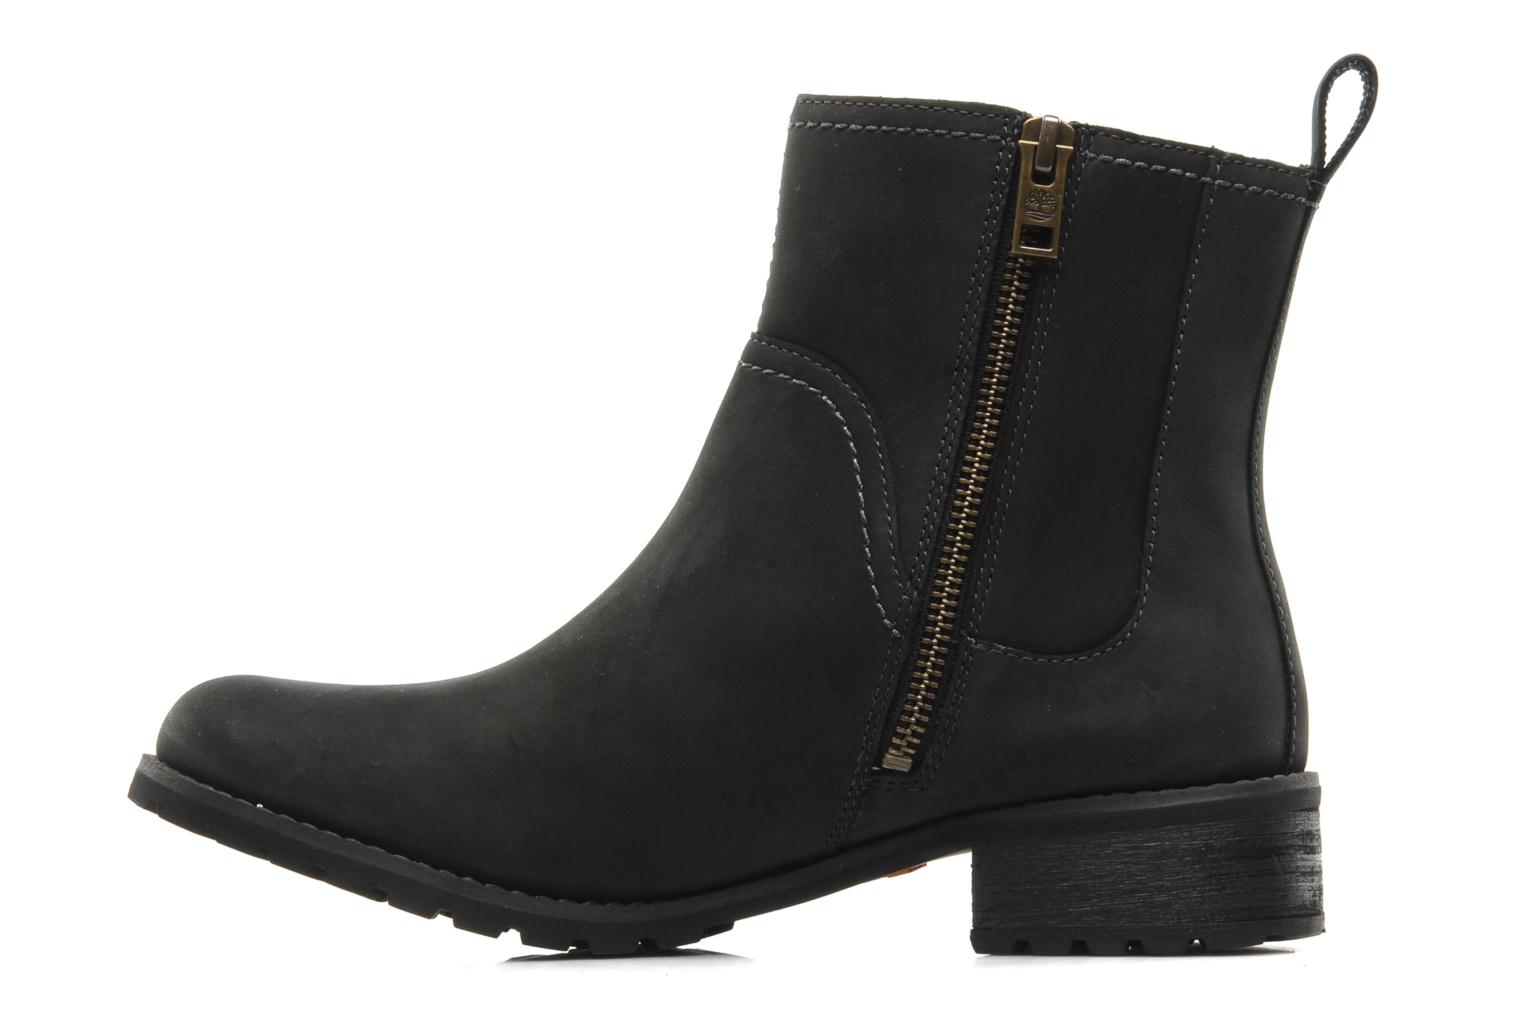 Timberland Earthkeepers Bethel Chelsea Ankle boots in Black at Sarenza ...